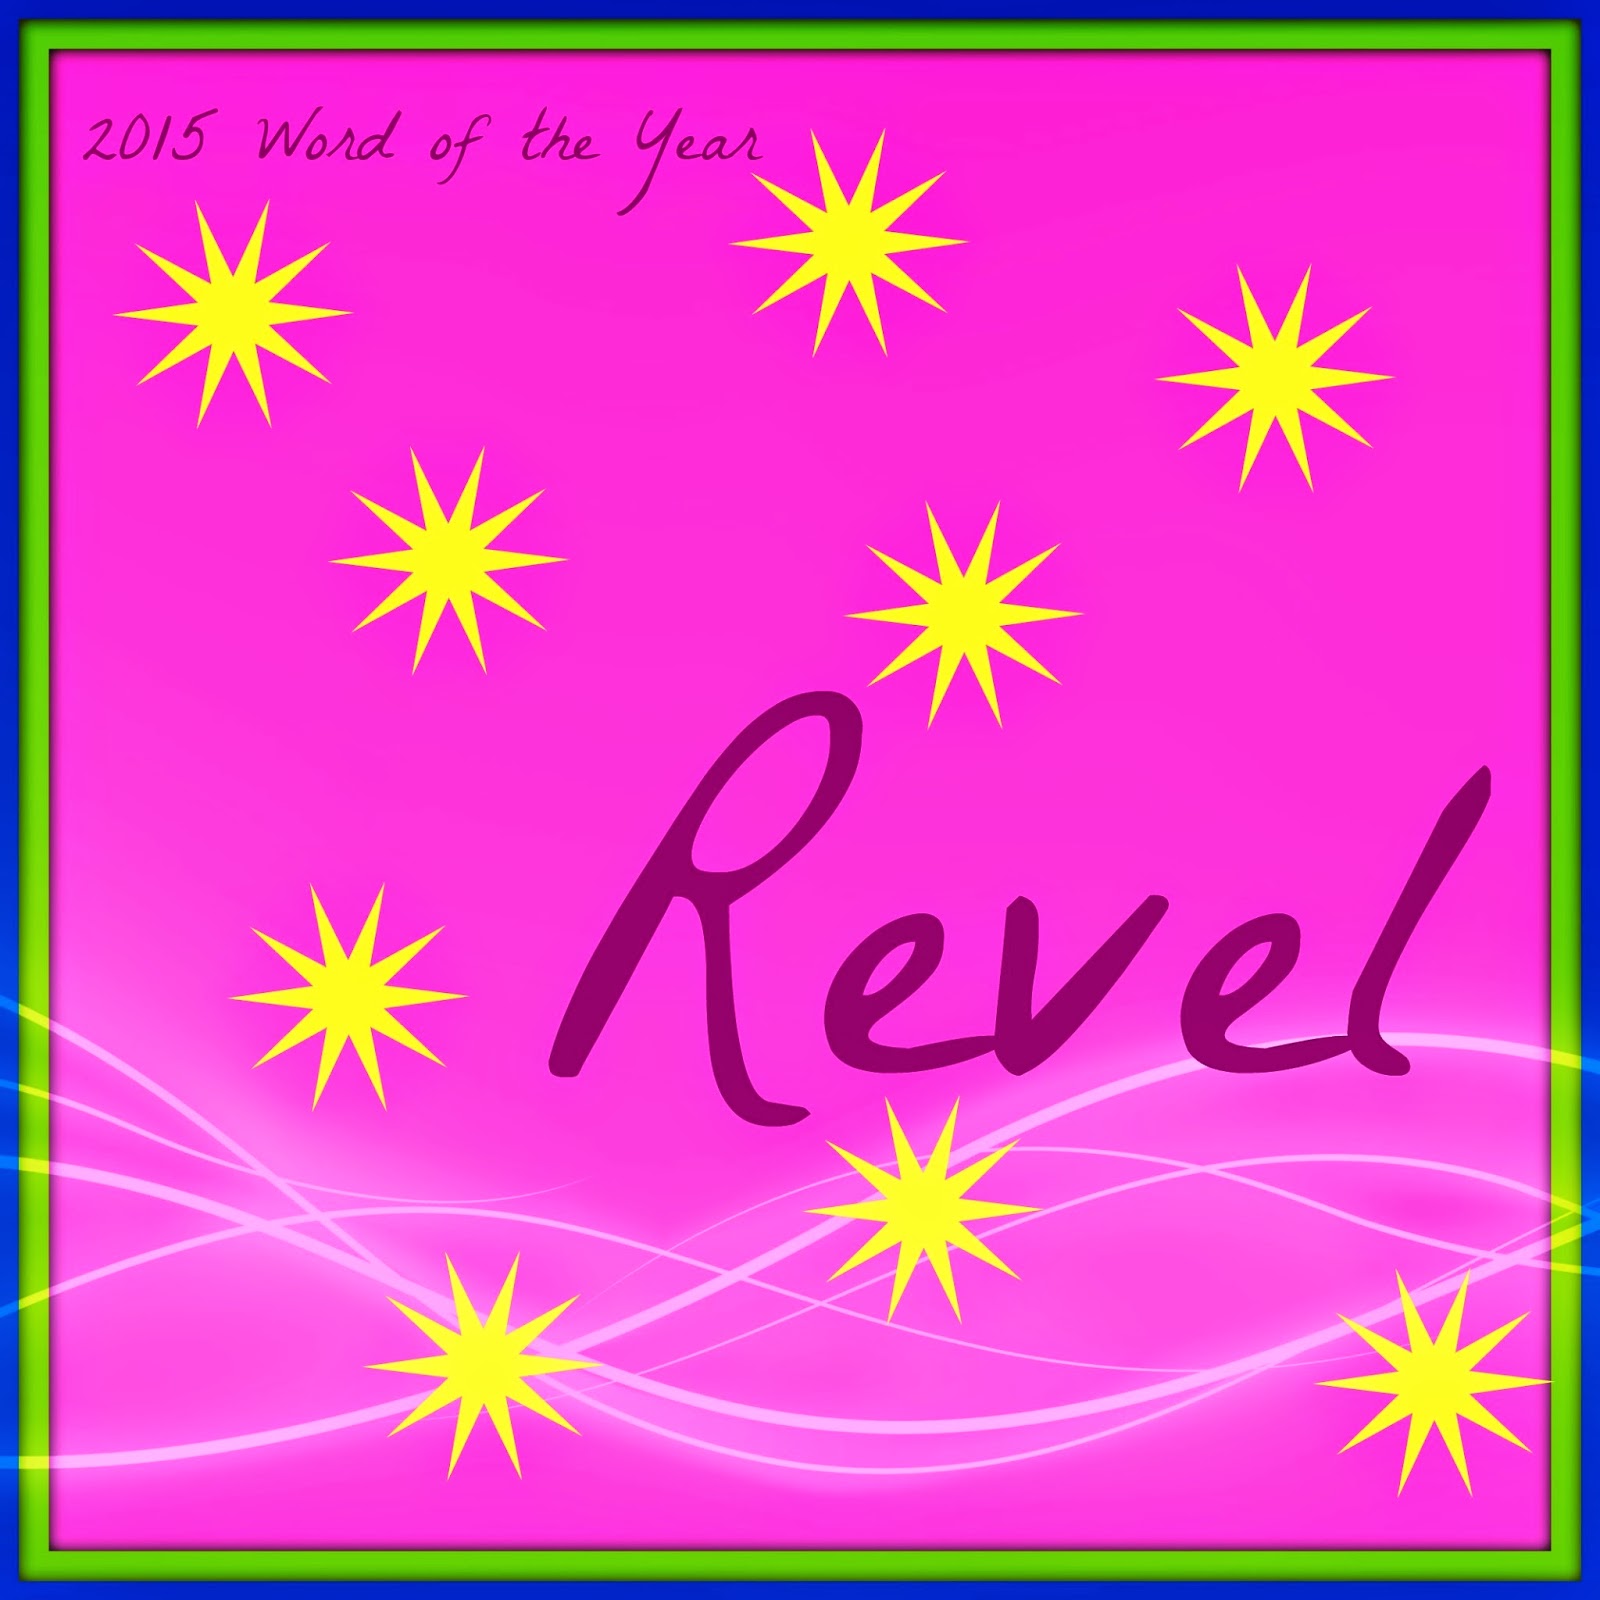 Revel by being Present, Patient, and Grateful